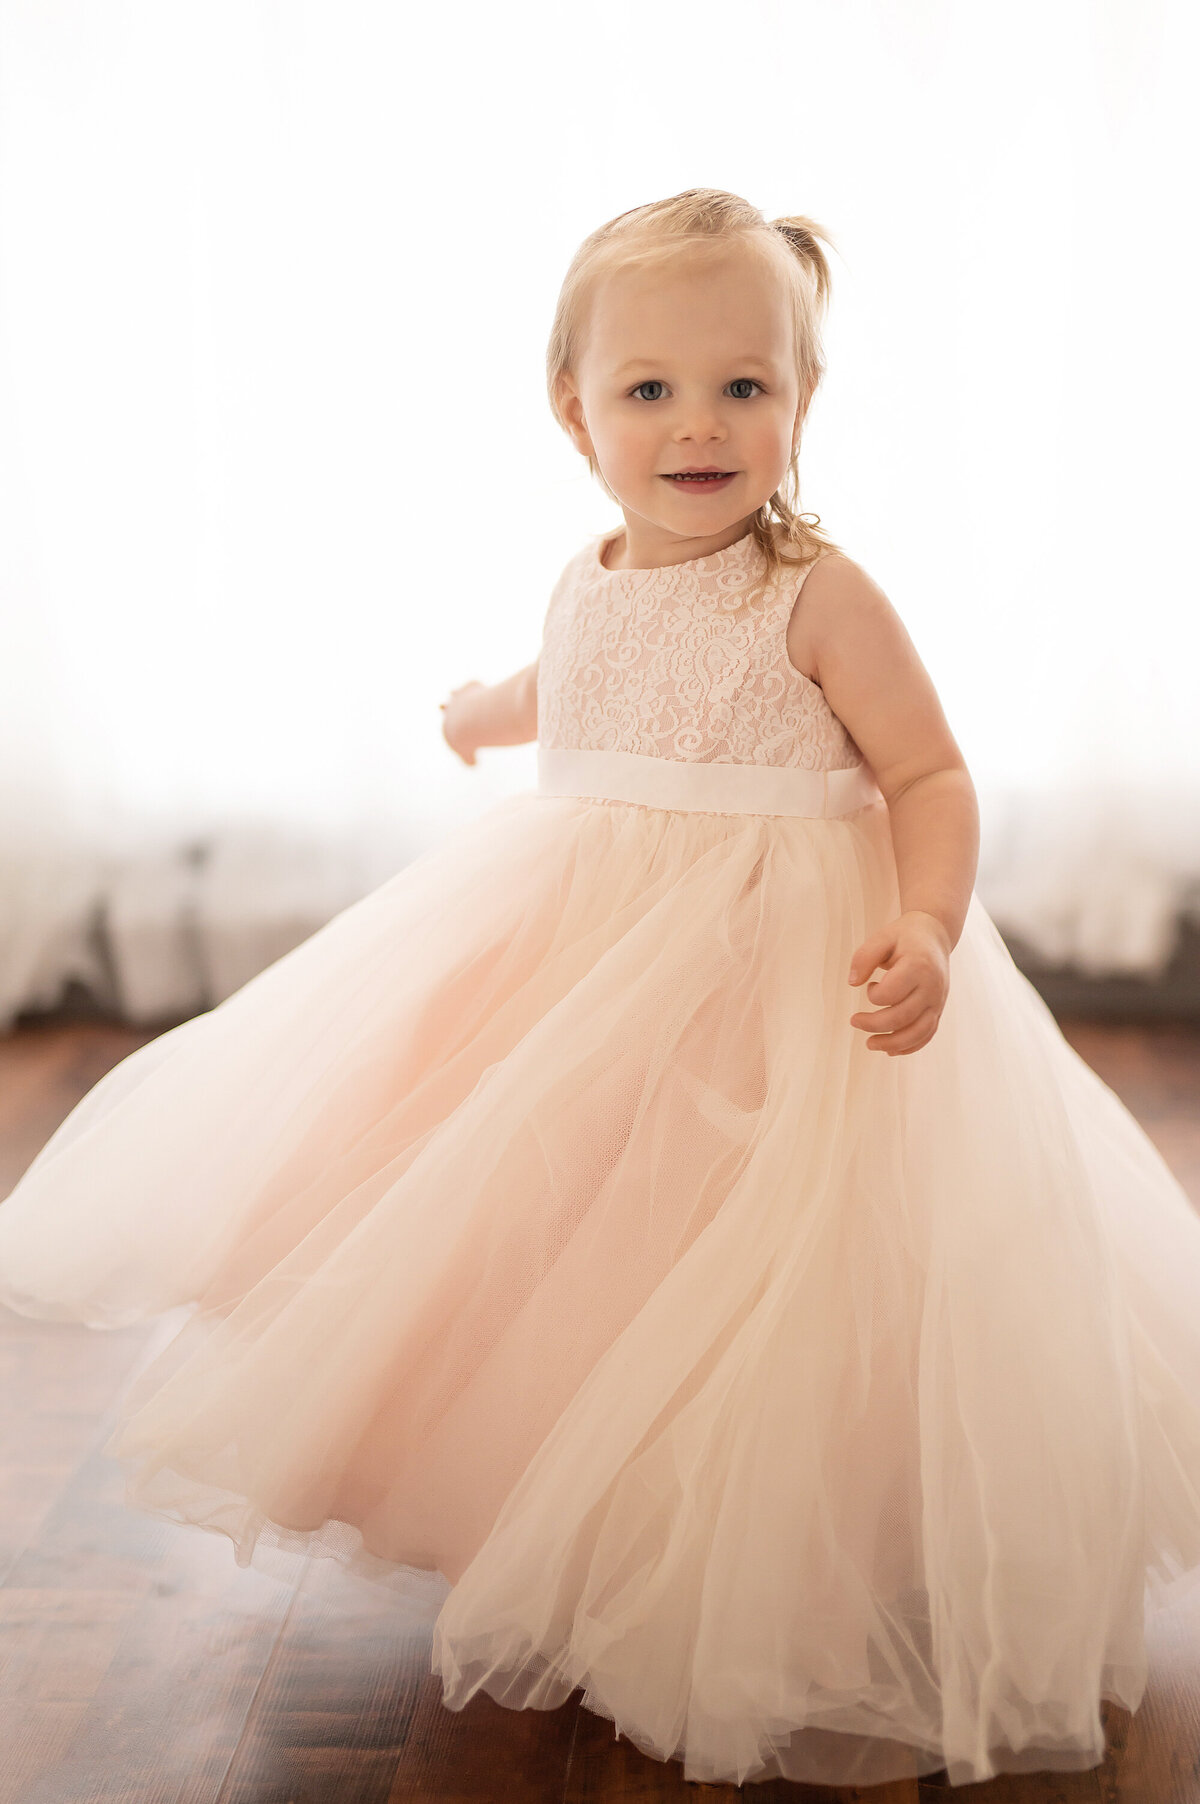 A toddler girl twirls around our Waukesha photos studio in a light pink gown.